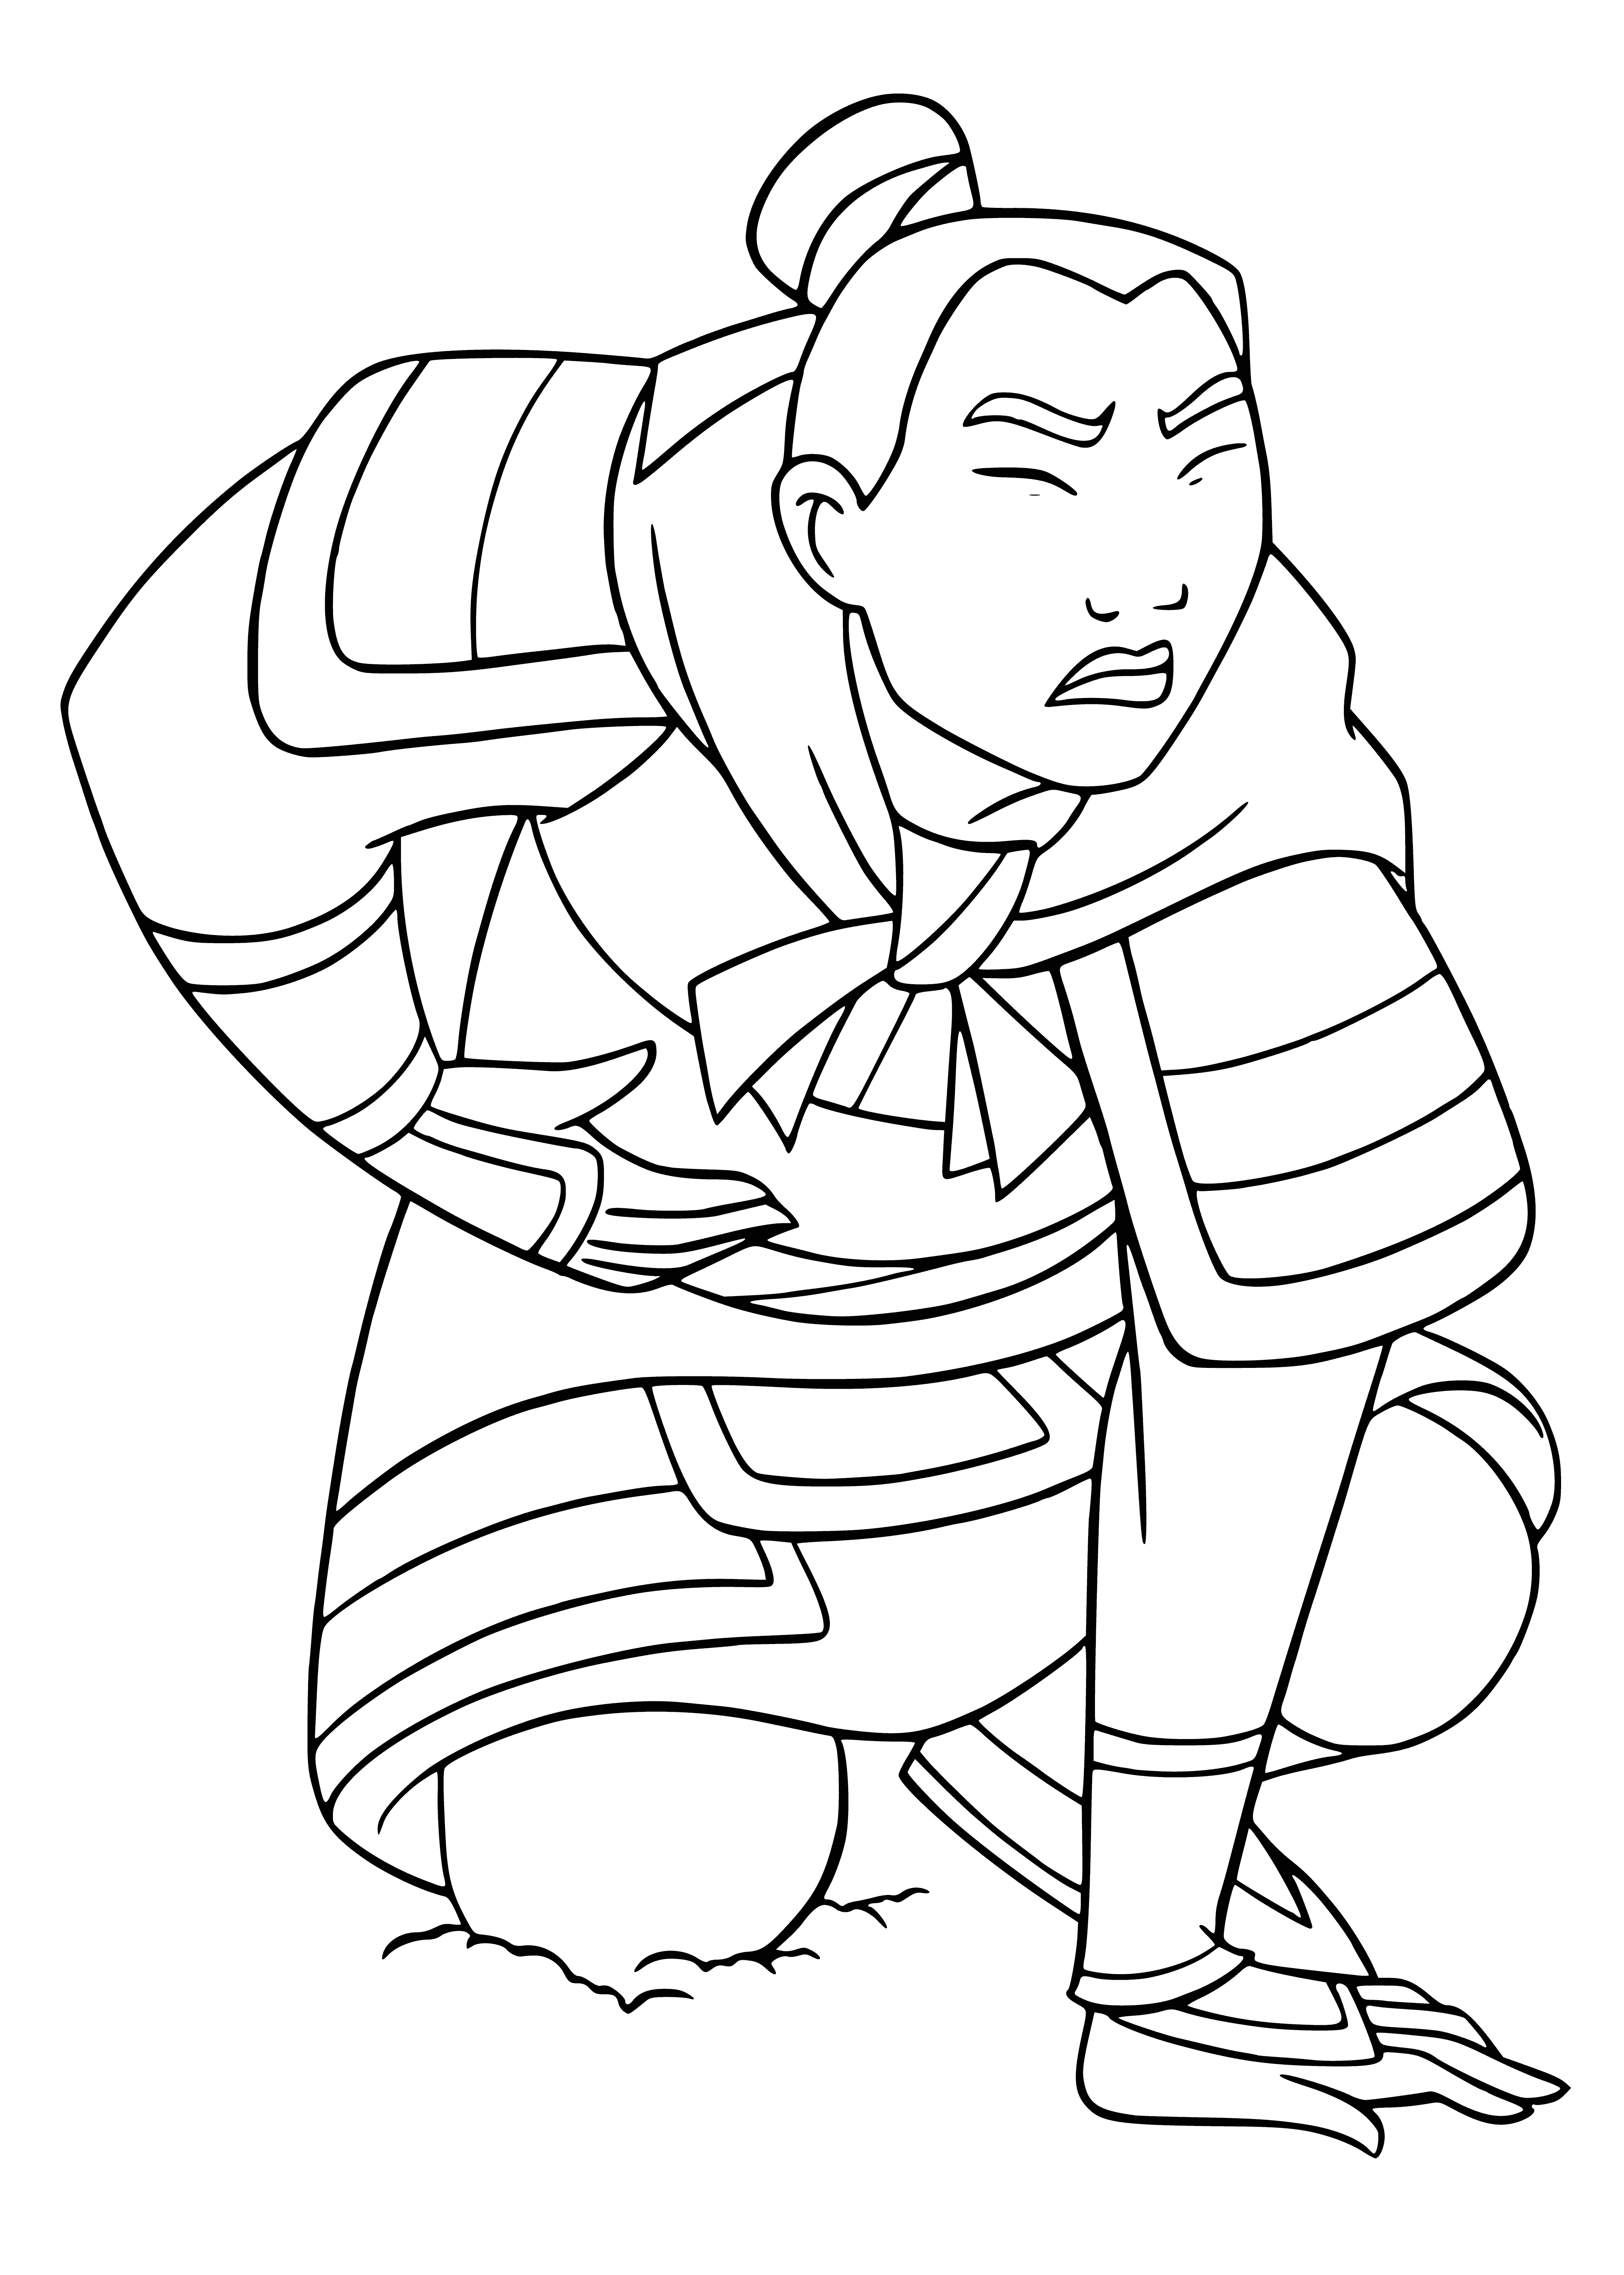 Mulan wounded coloring page